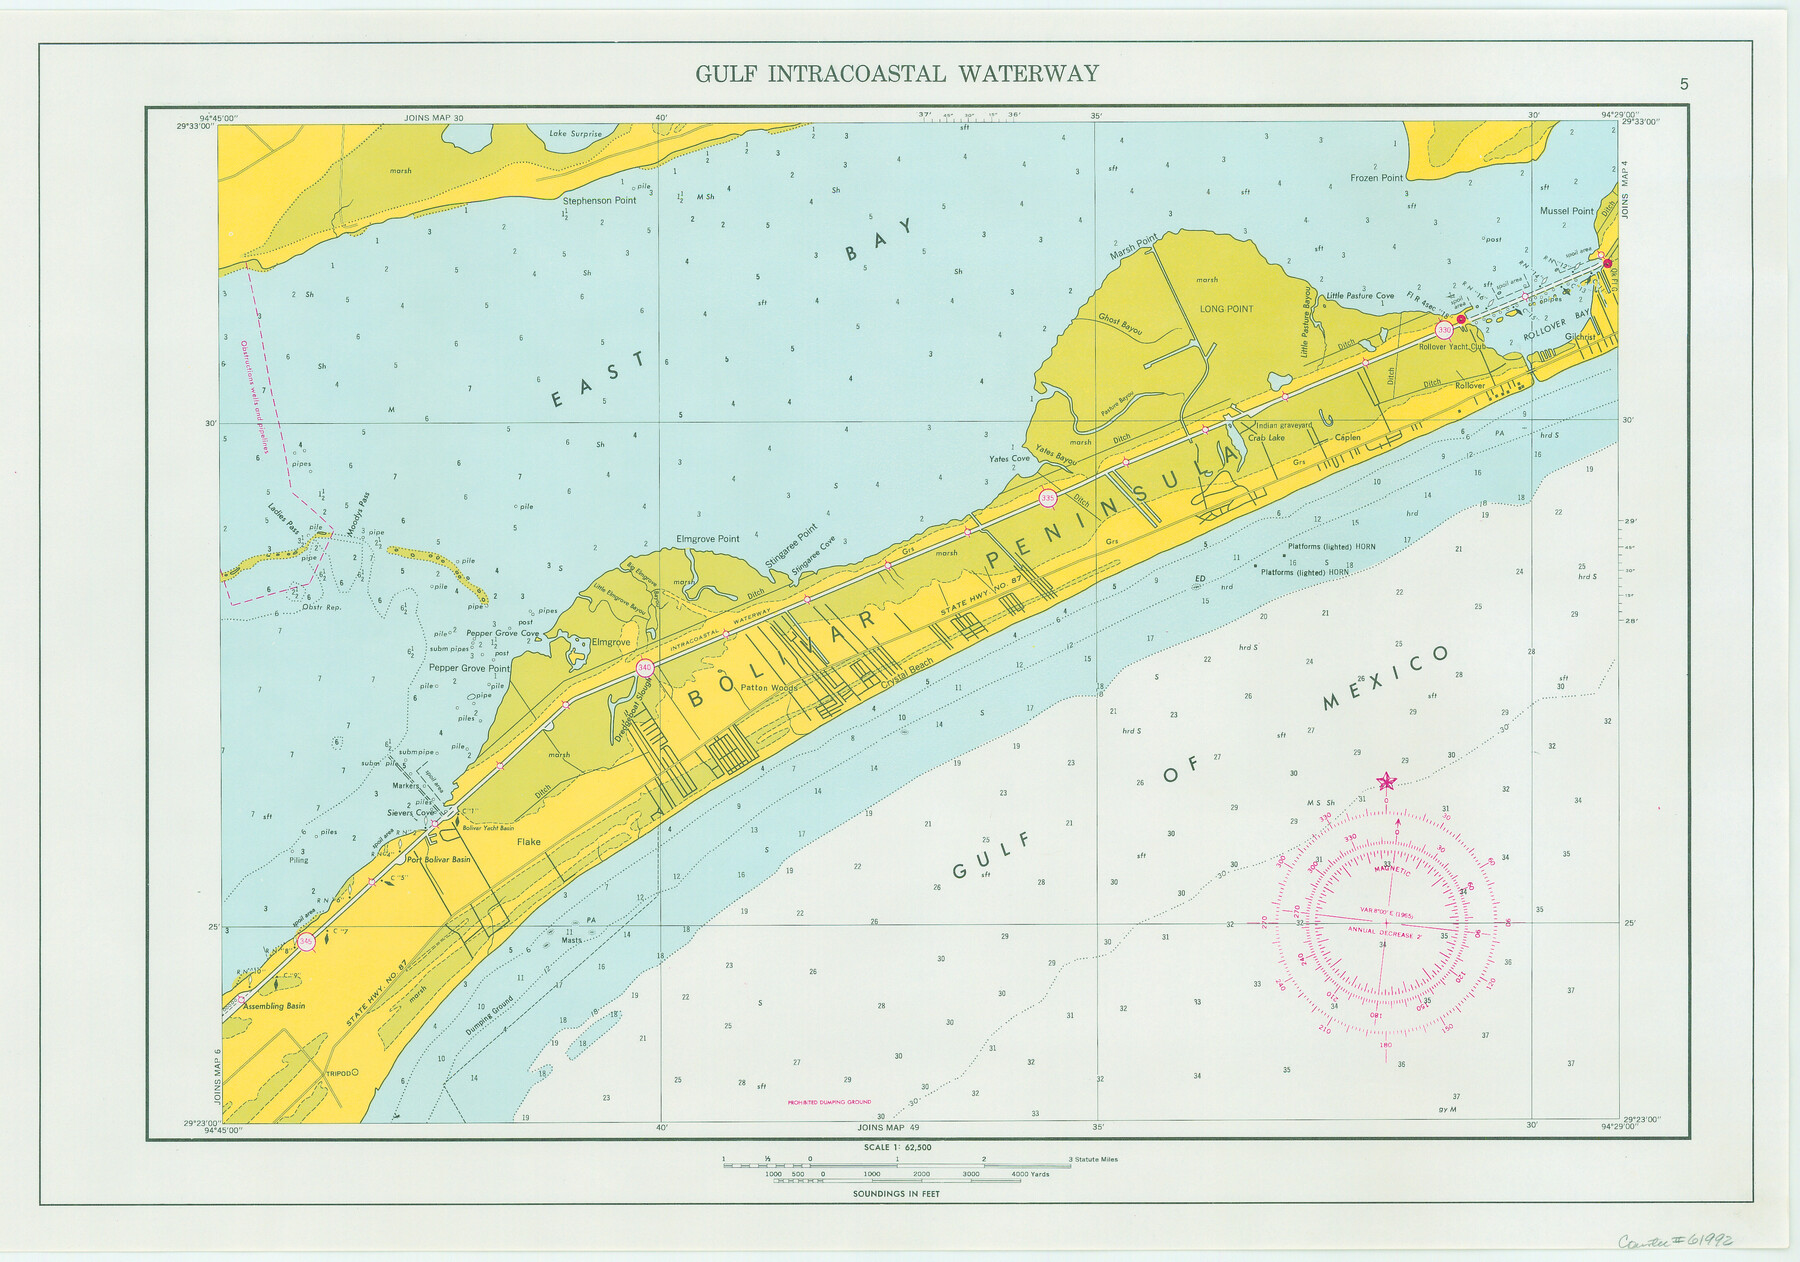 61992, Maps of Gulf Intracoastal Waterway, Texas - Sabine River to the Rio Grande and connecting waterways including ship channels, General Map Collection